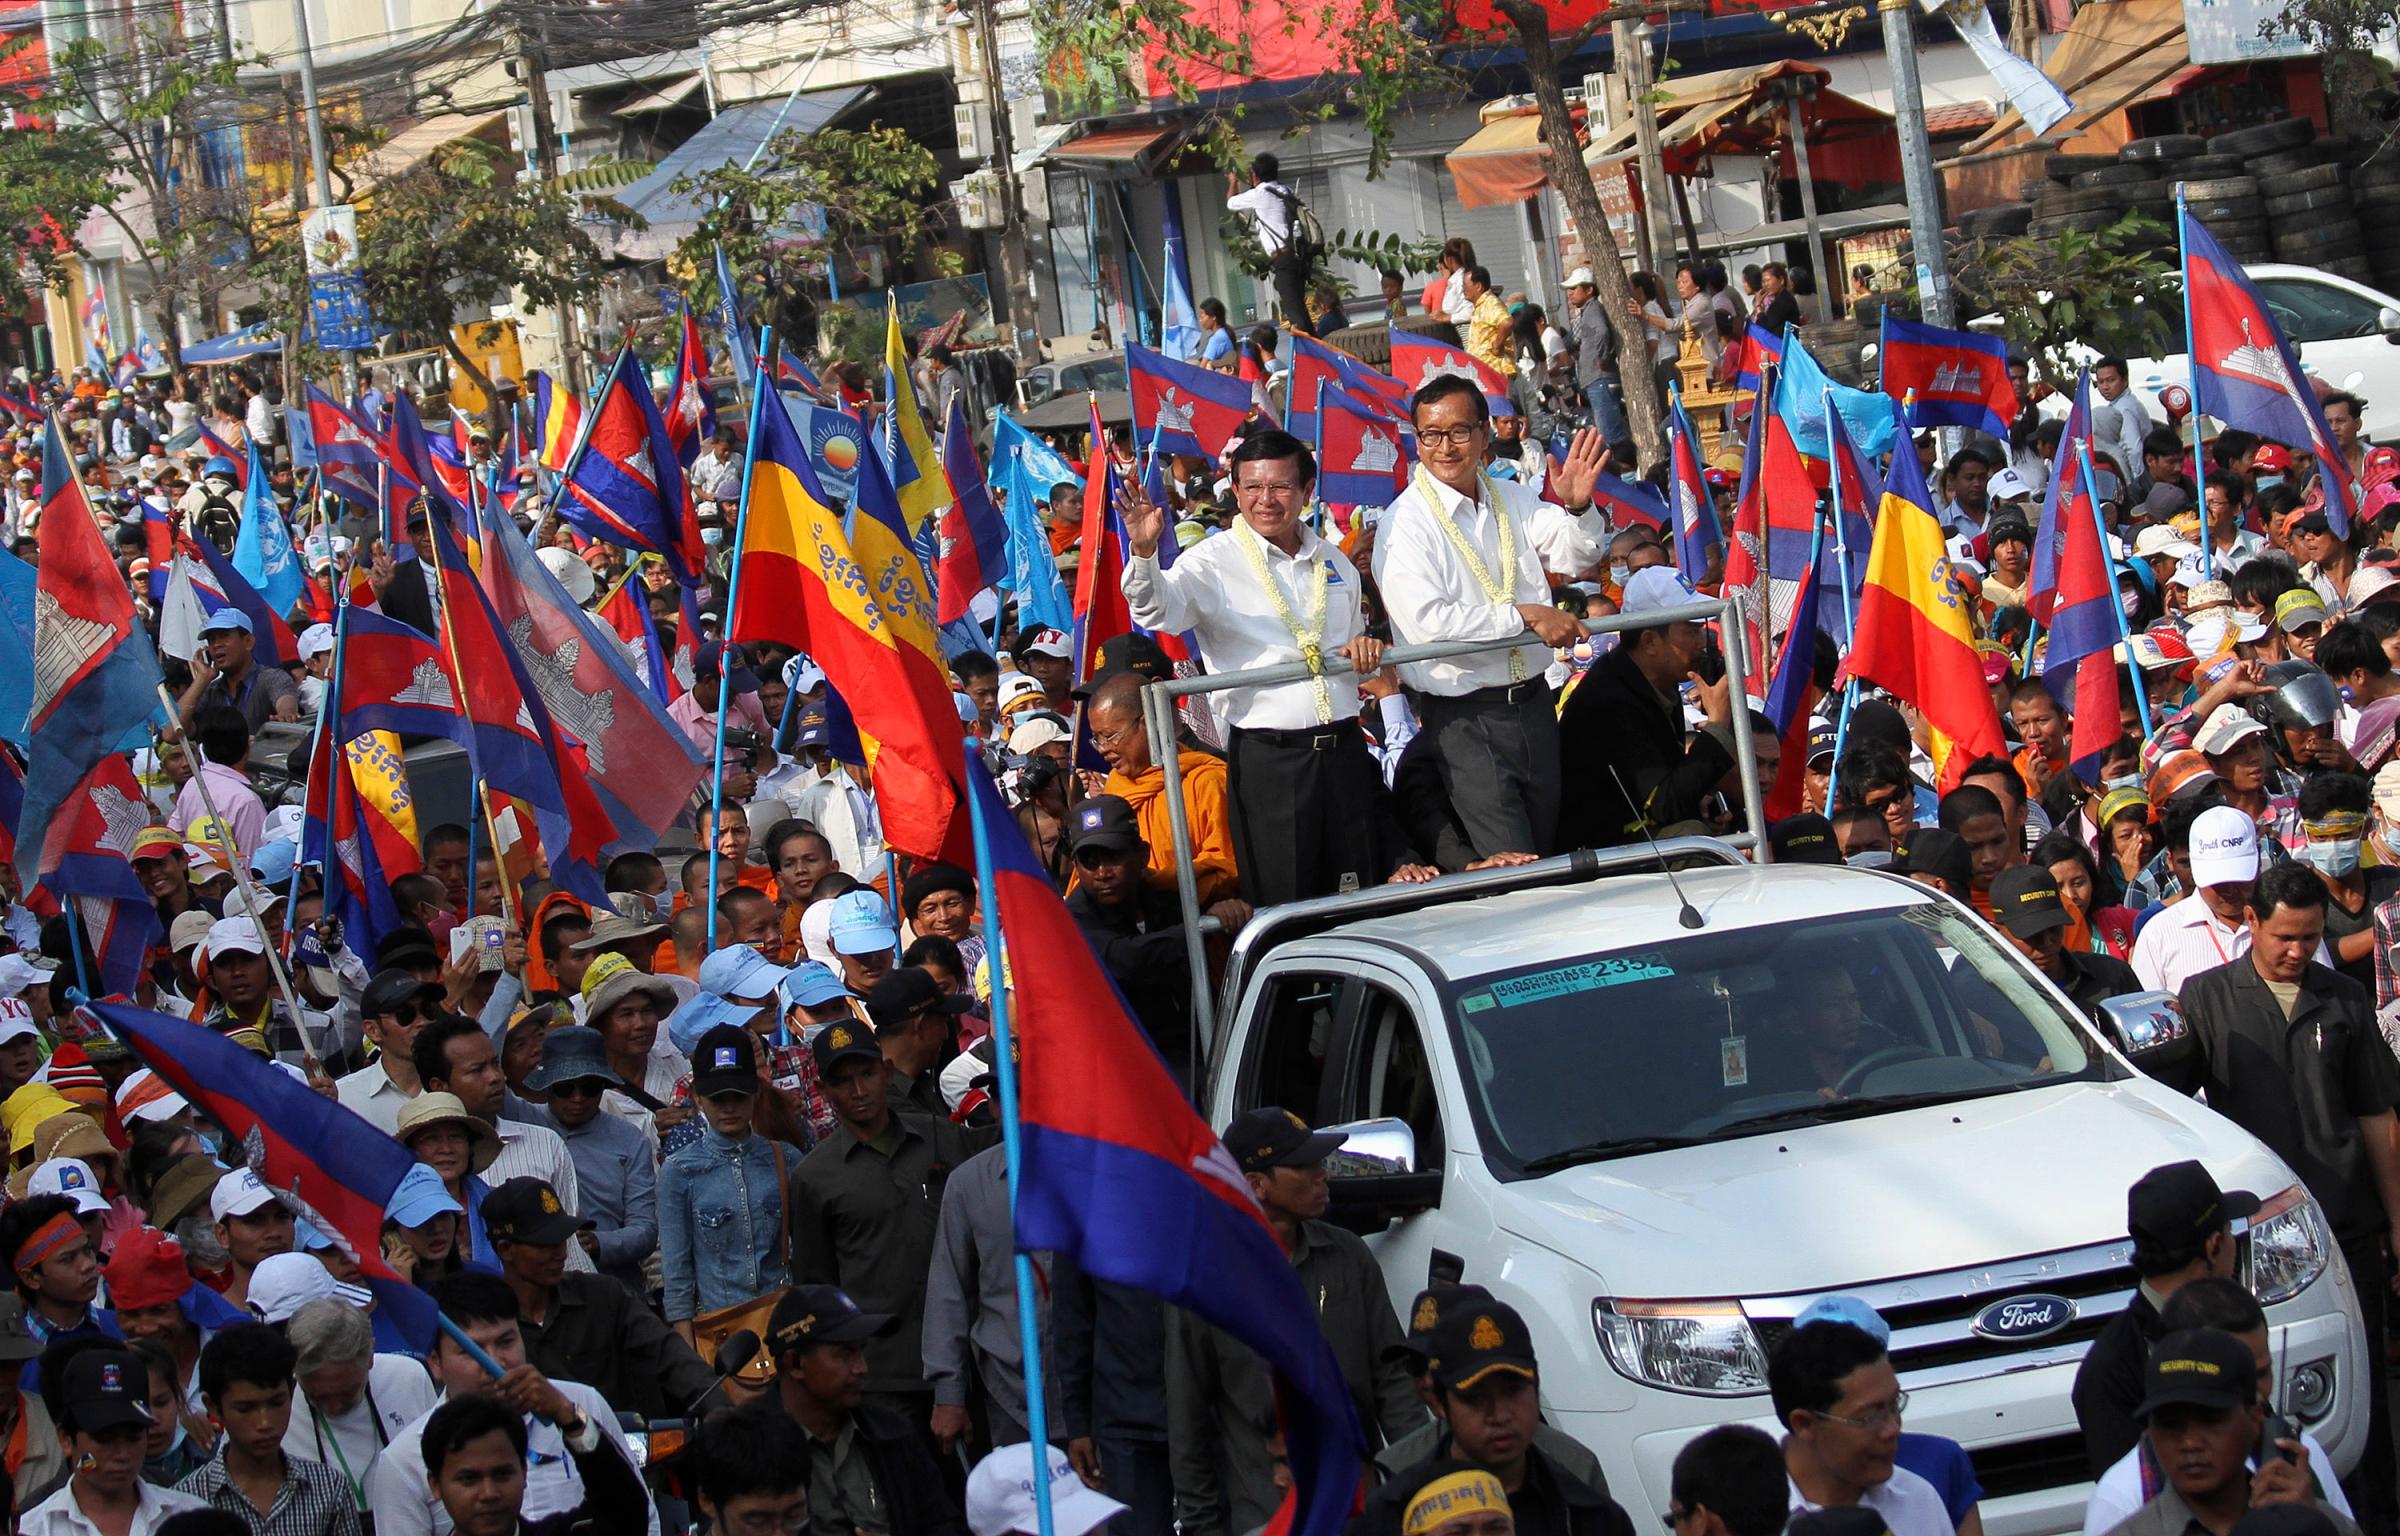 Sam Rainsy, president of the opposition Cambodian National Rescue Party and party vice-president Sokha, stand on a vehicle while greeting supporters during a protest in Phnom Penh